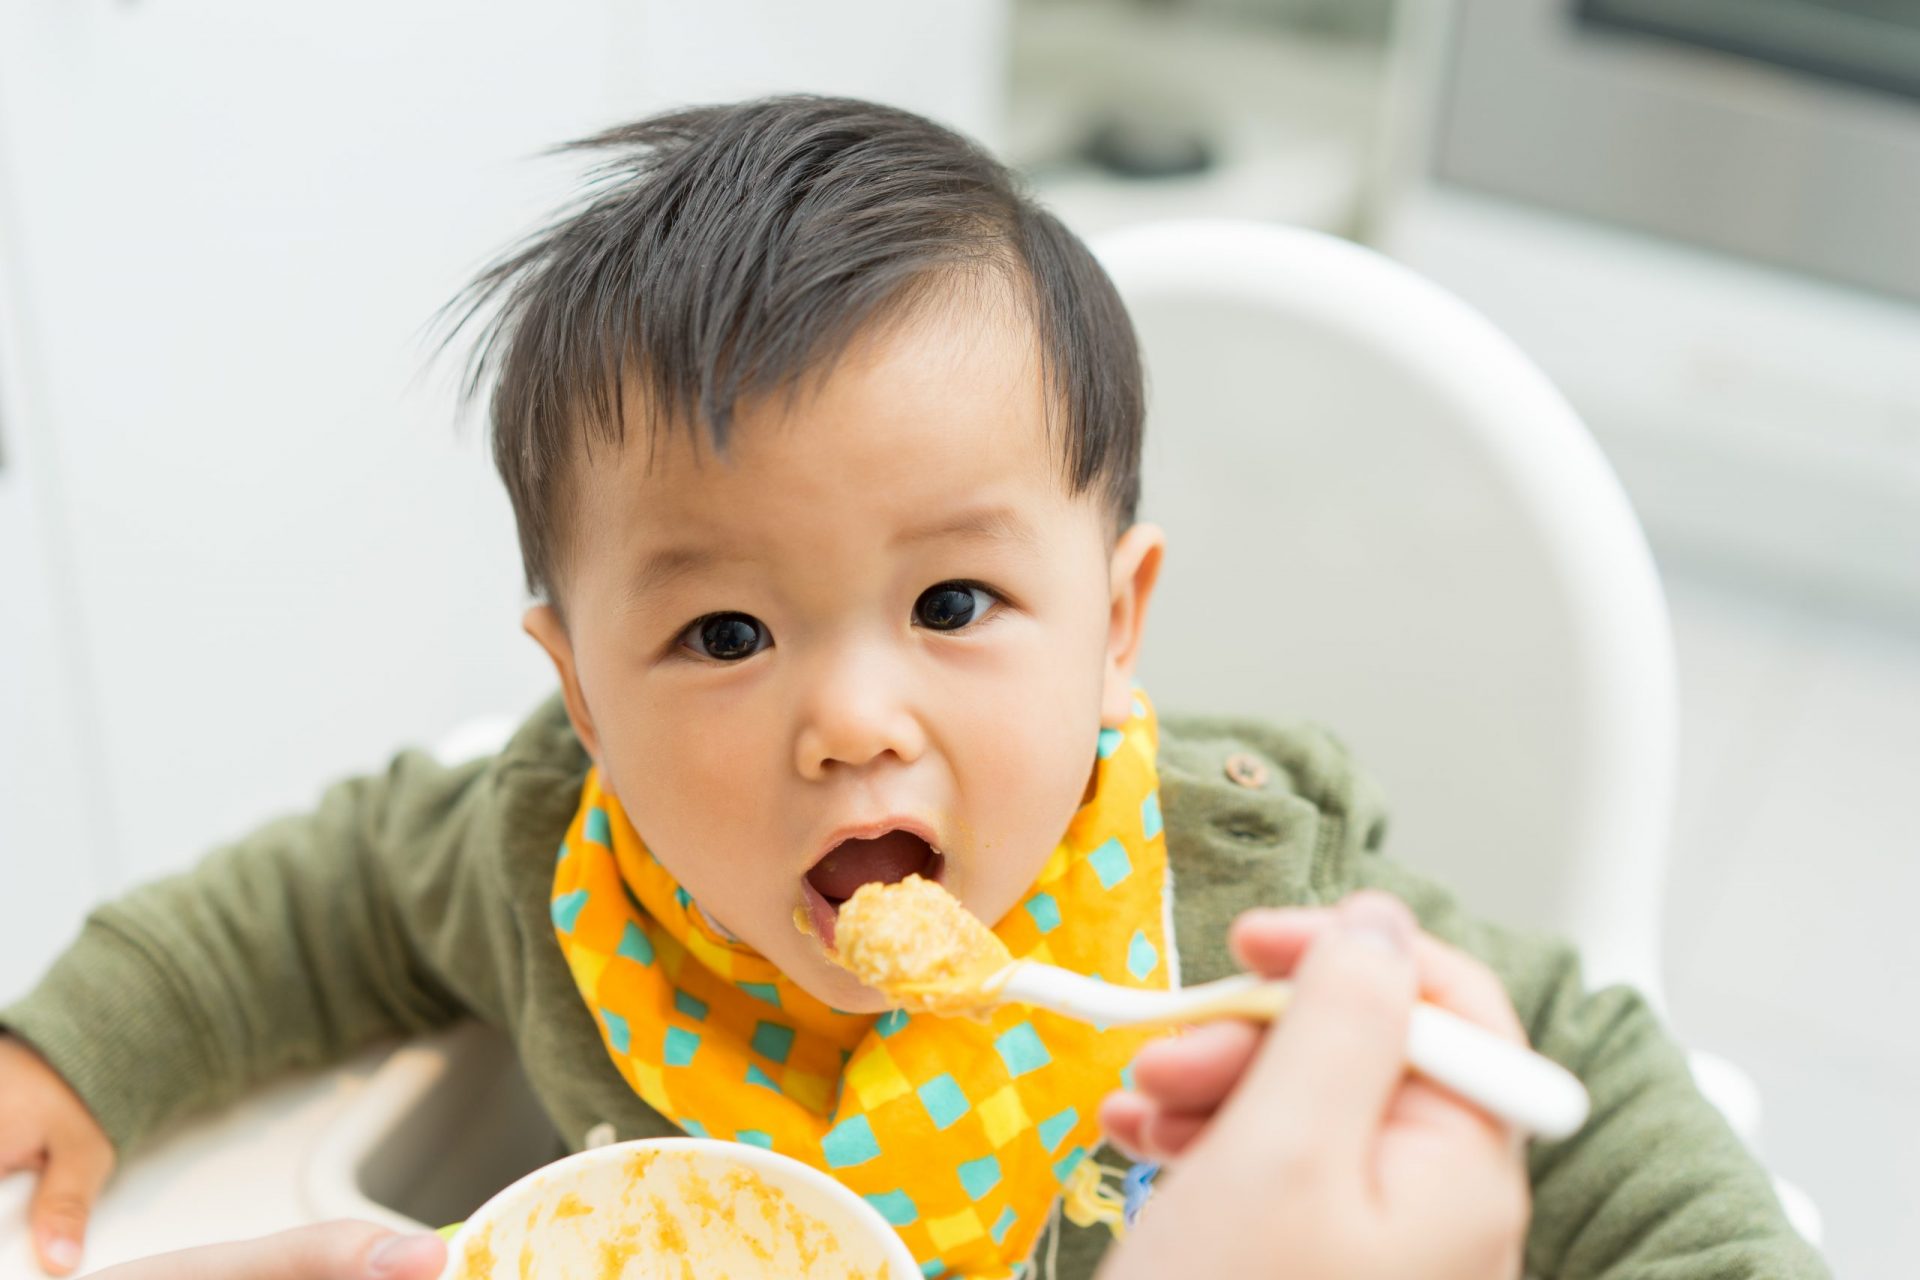 Eat Up!: Prevent peanut allergies from a young age